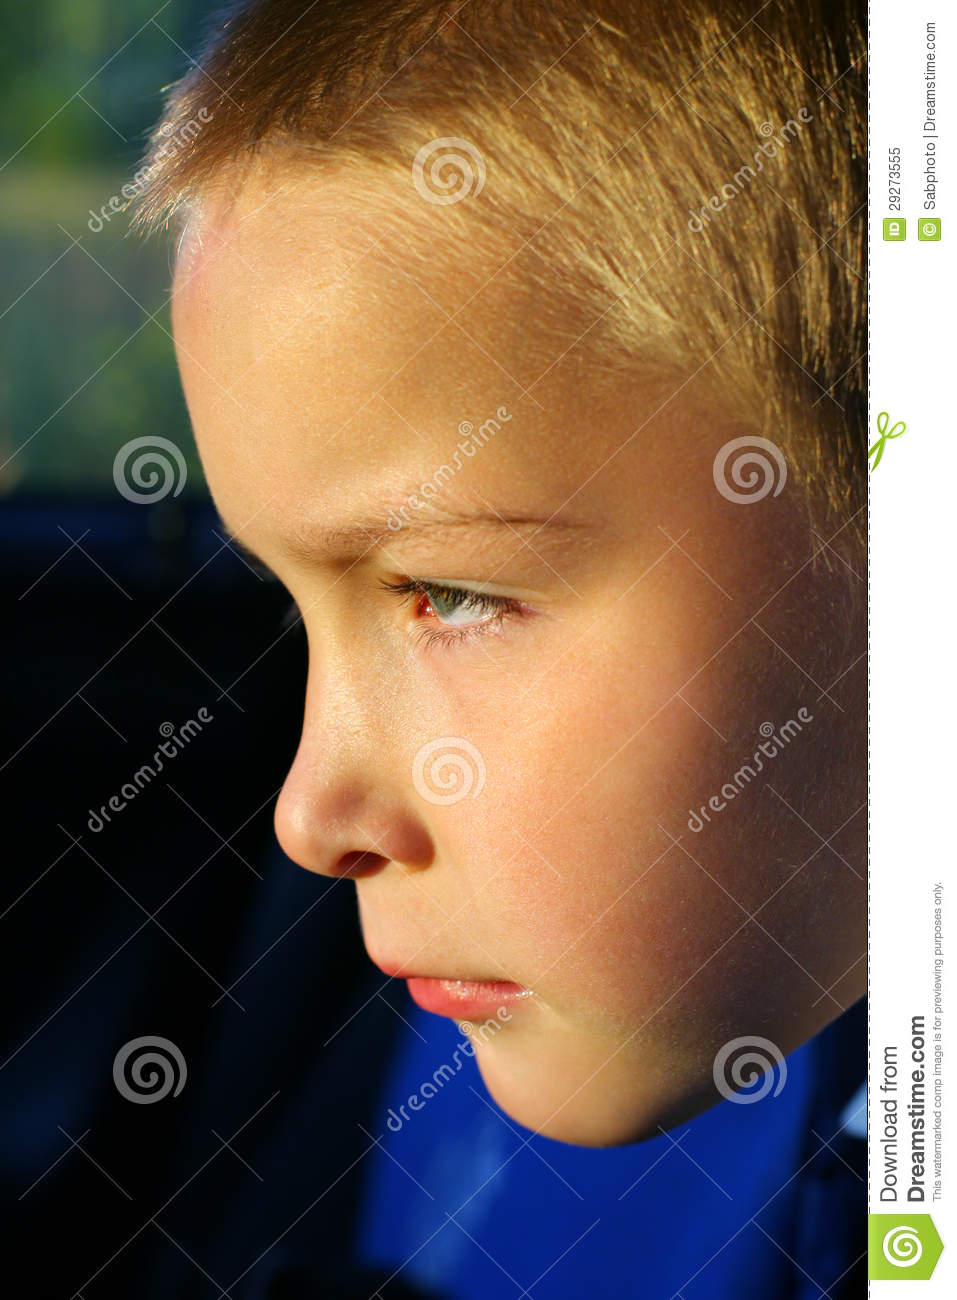 Serious Boy Face Royalty Free Stock Photo   Image  29273555